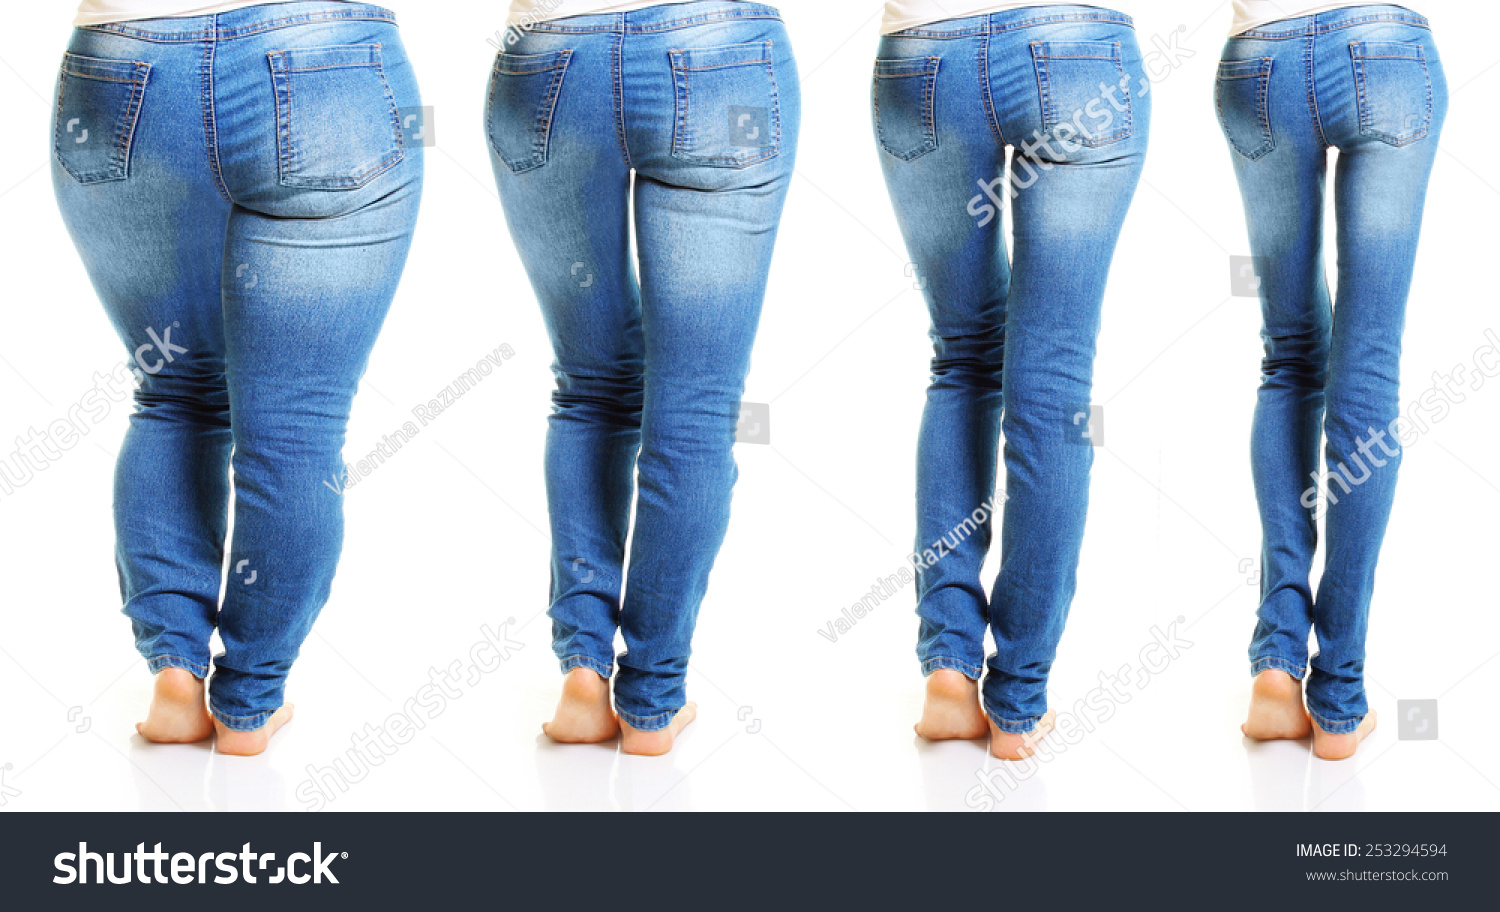 Woman In Blue Jeans Isolated On White Background From Fat To Thin. Diet ...